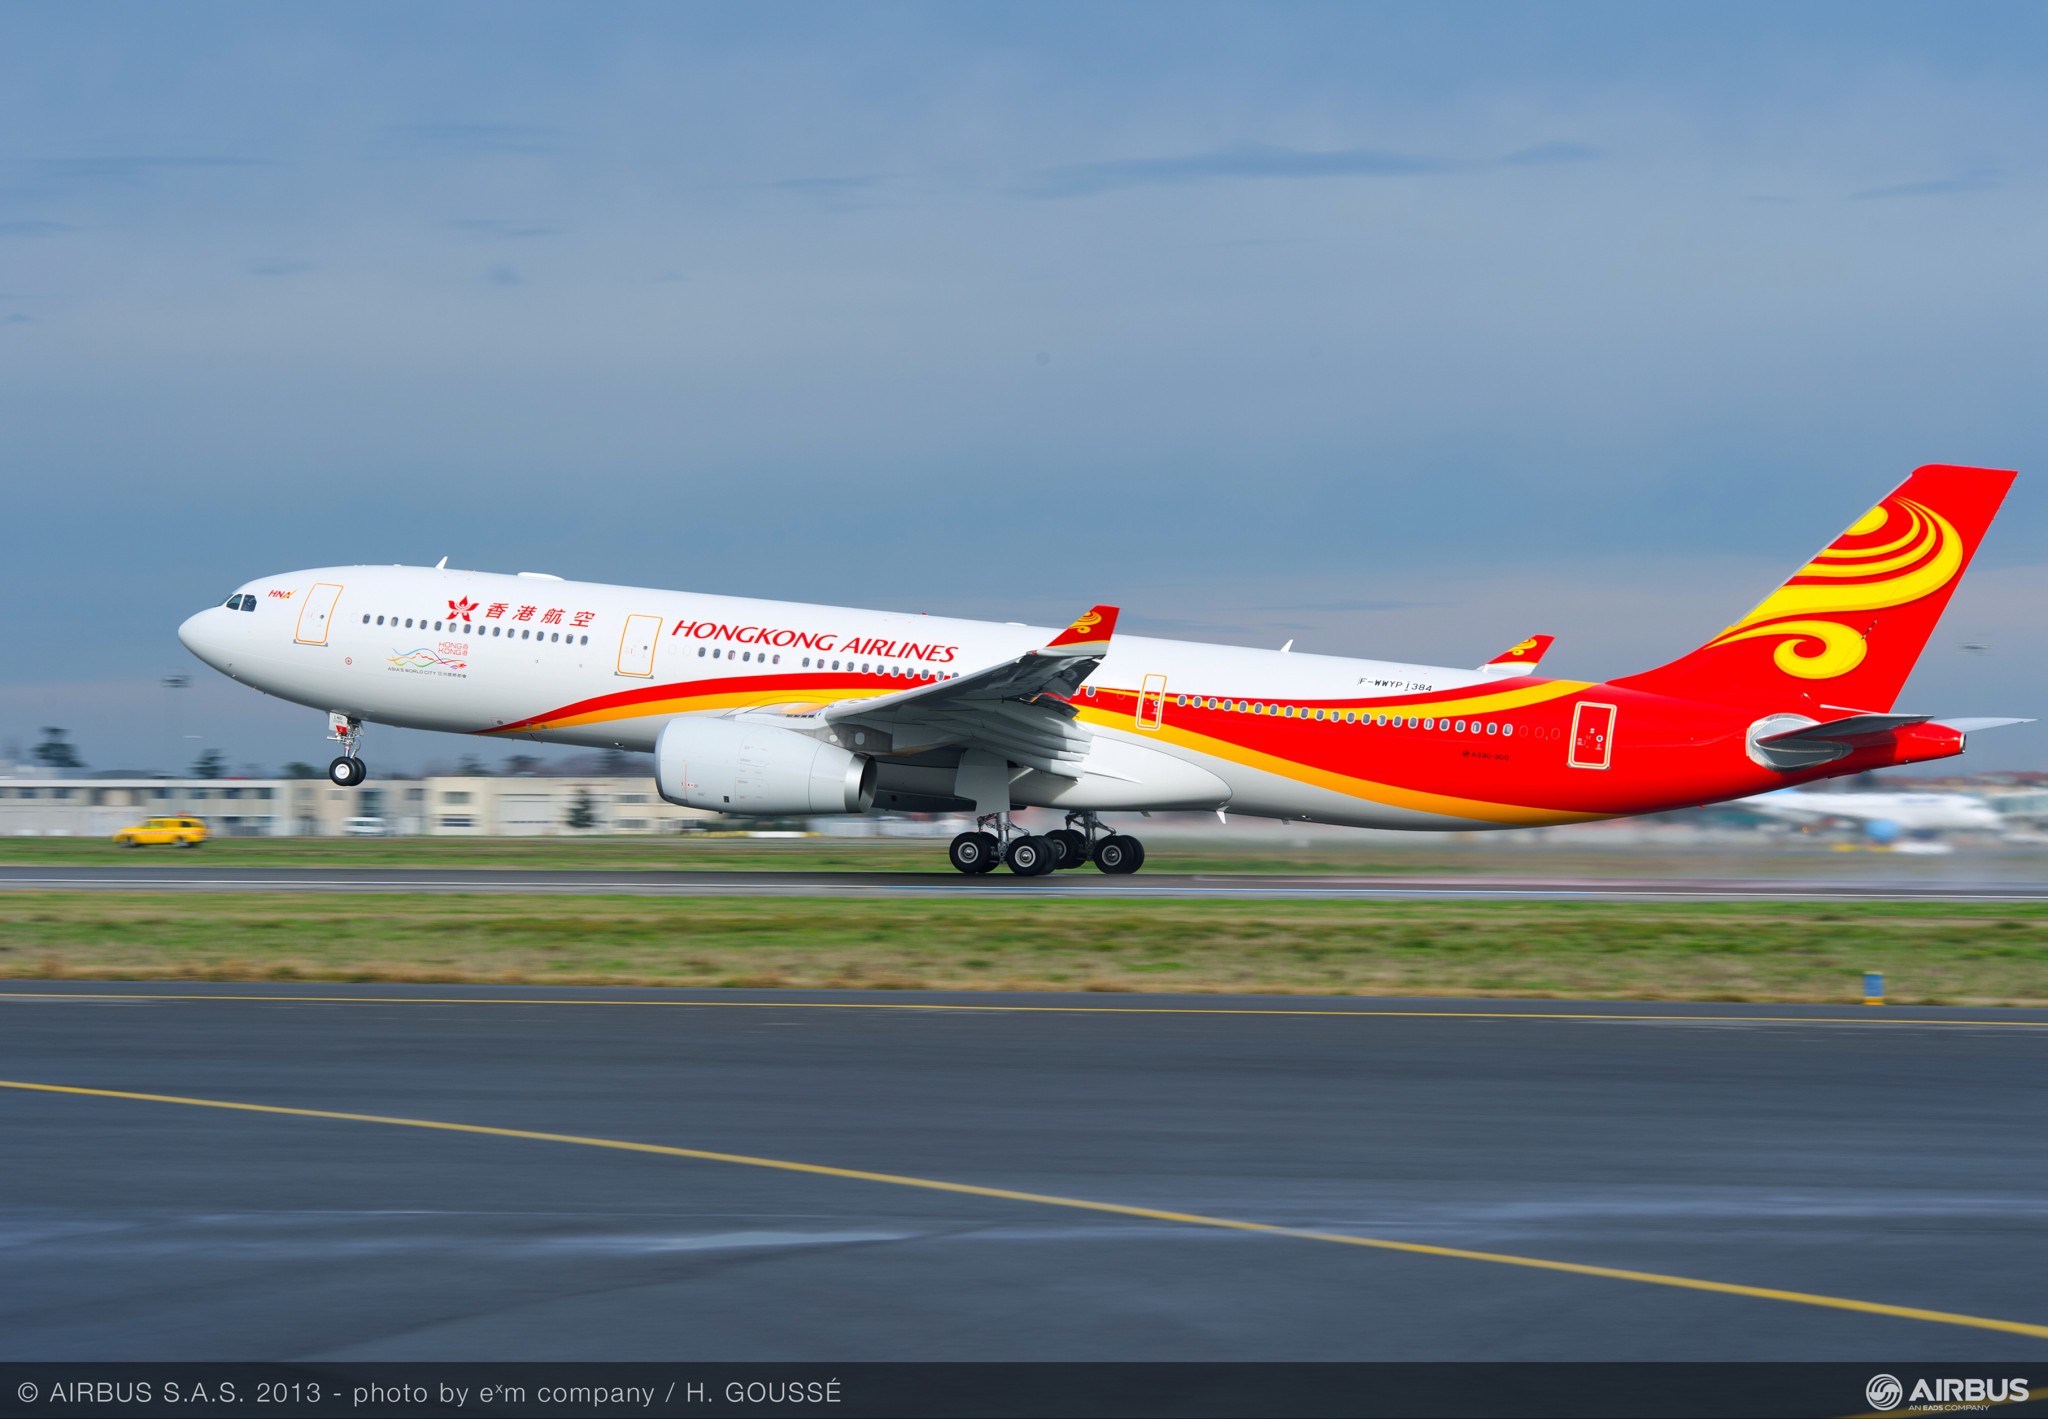 Creditors approve Hong Kong Airlines $6.3bn restructuring plan